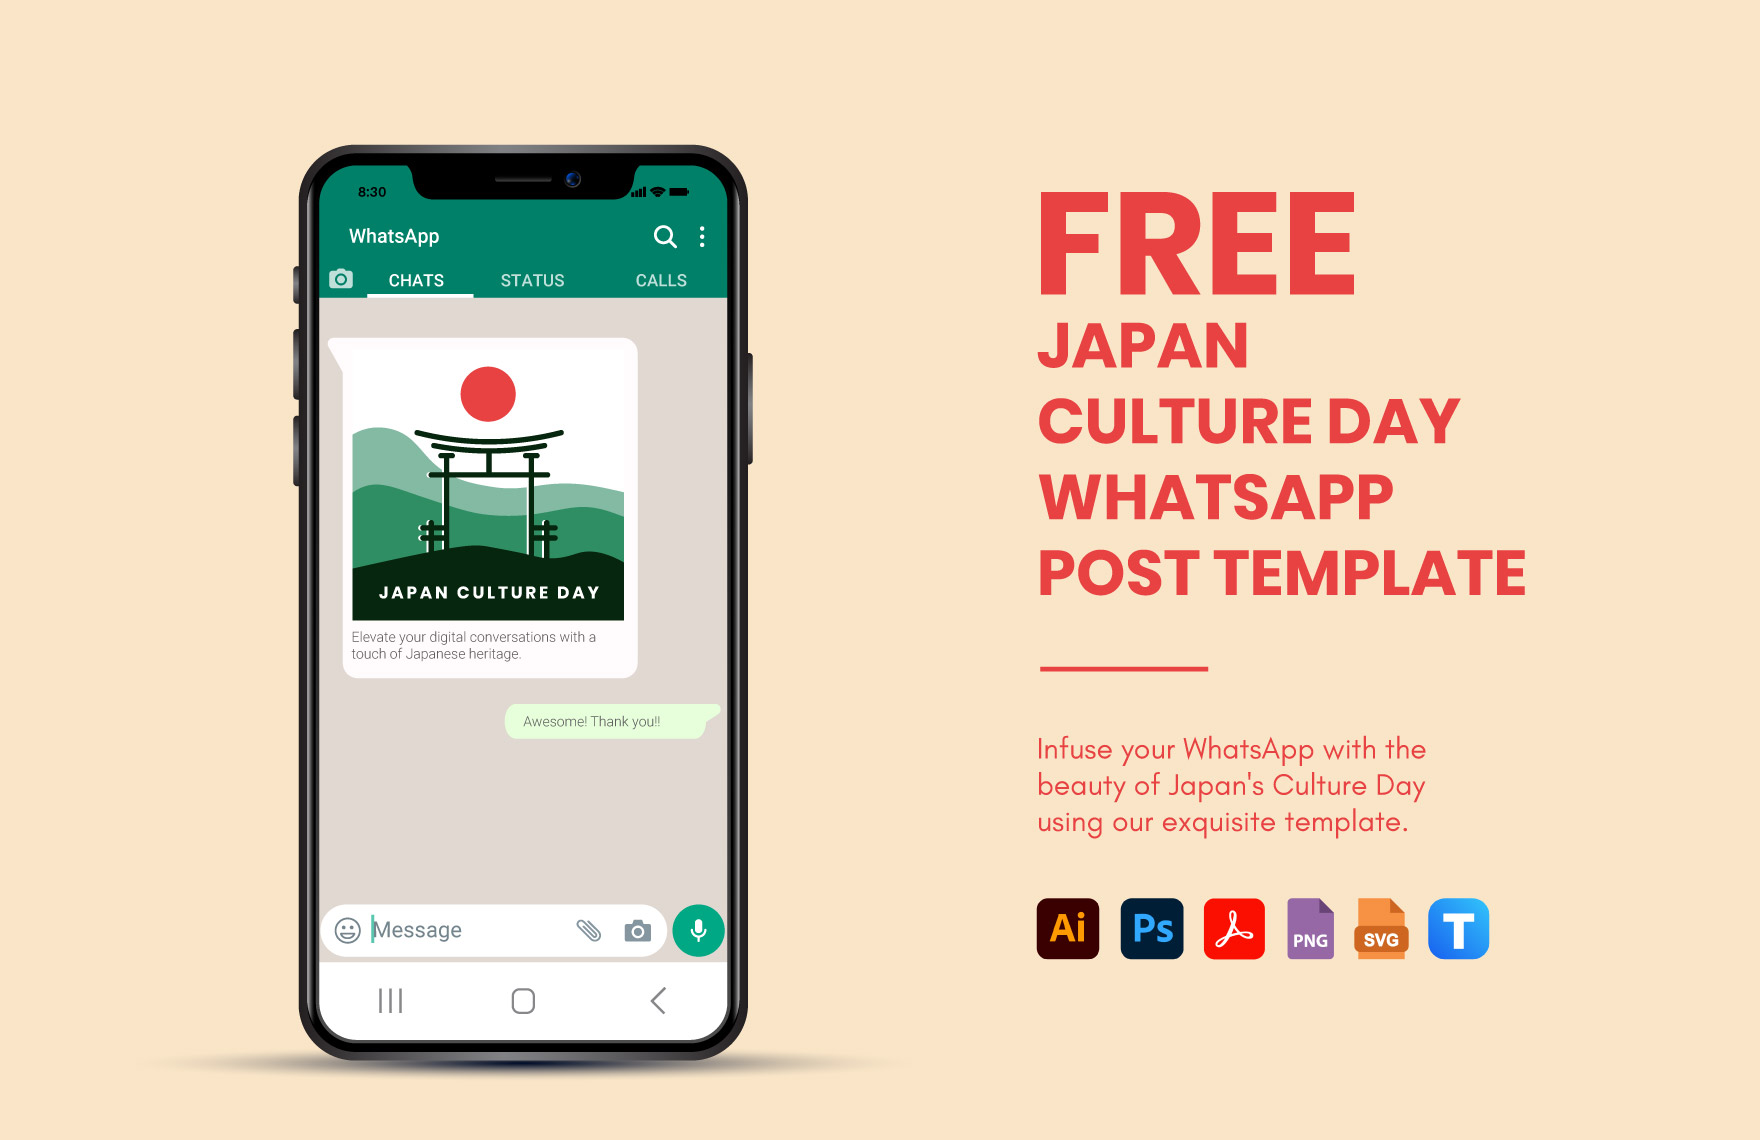 Free Japan Culture Day WhatsApp Post Template in PDF, Illustrator, PSD, SVG, PNG